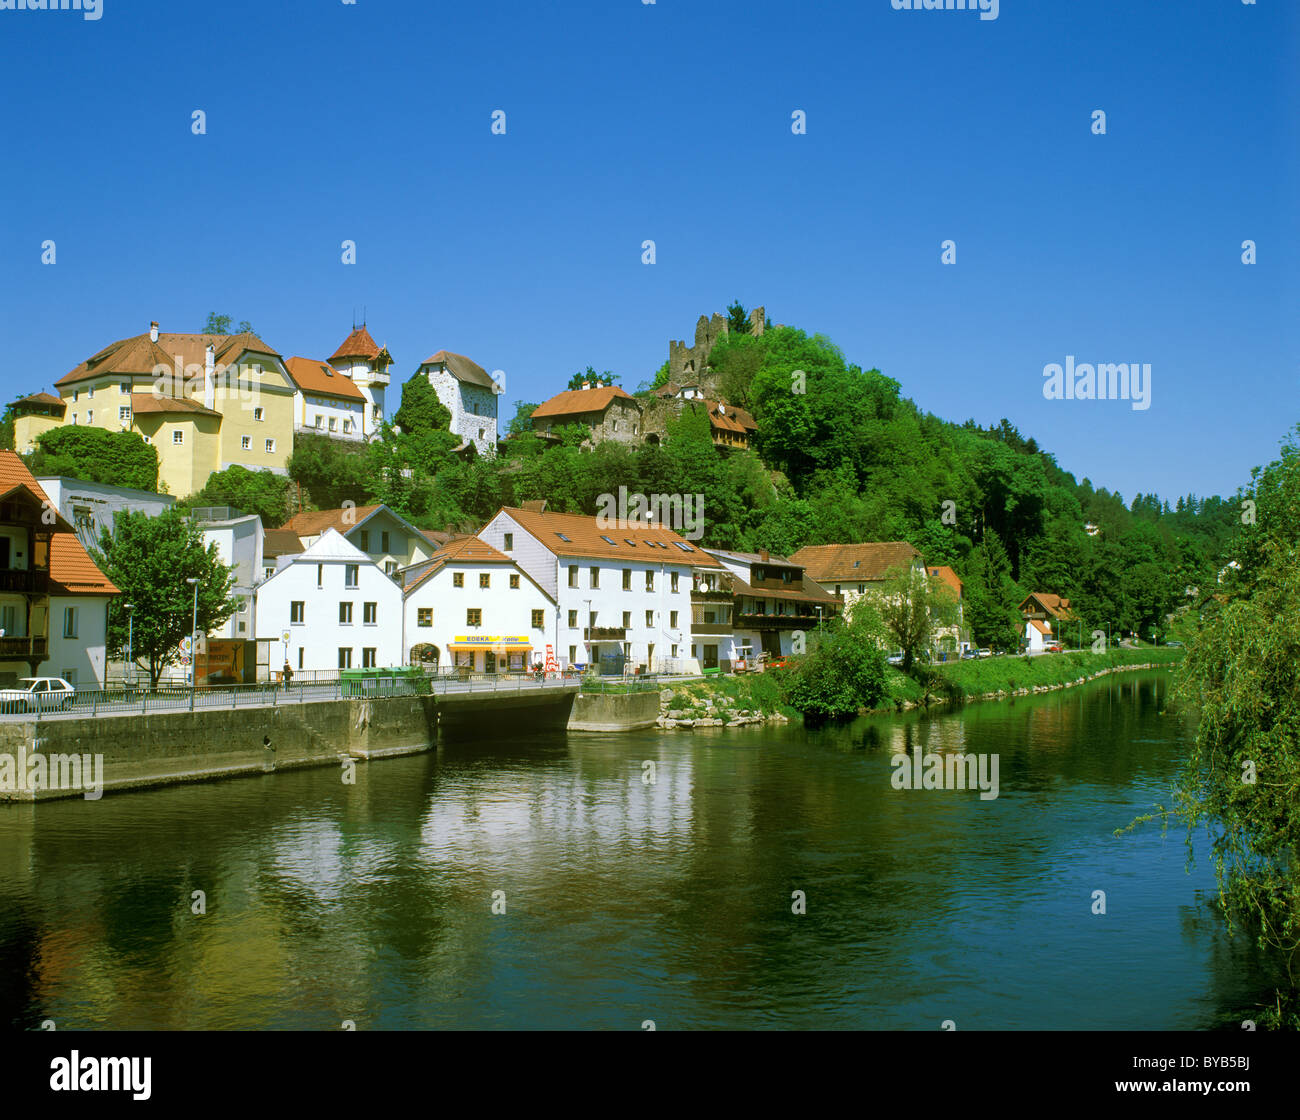 Hals with the Ruine Hals castle ruins, above the river Ilz, Passau, Lower Bavaria, Germany, Europe Stock Photo